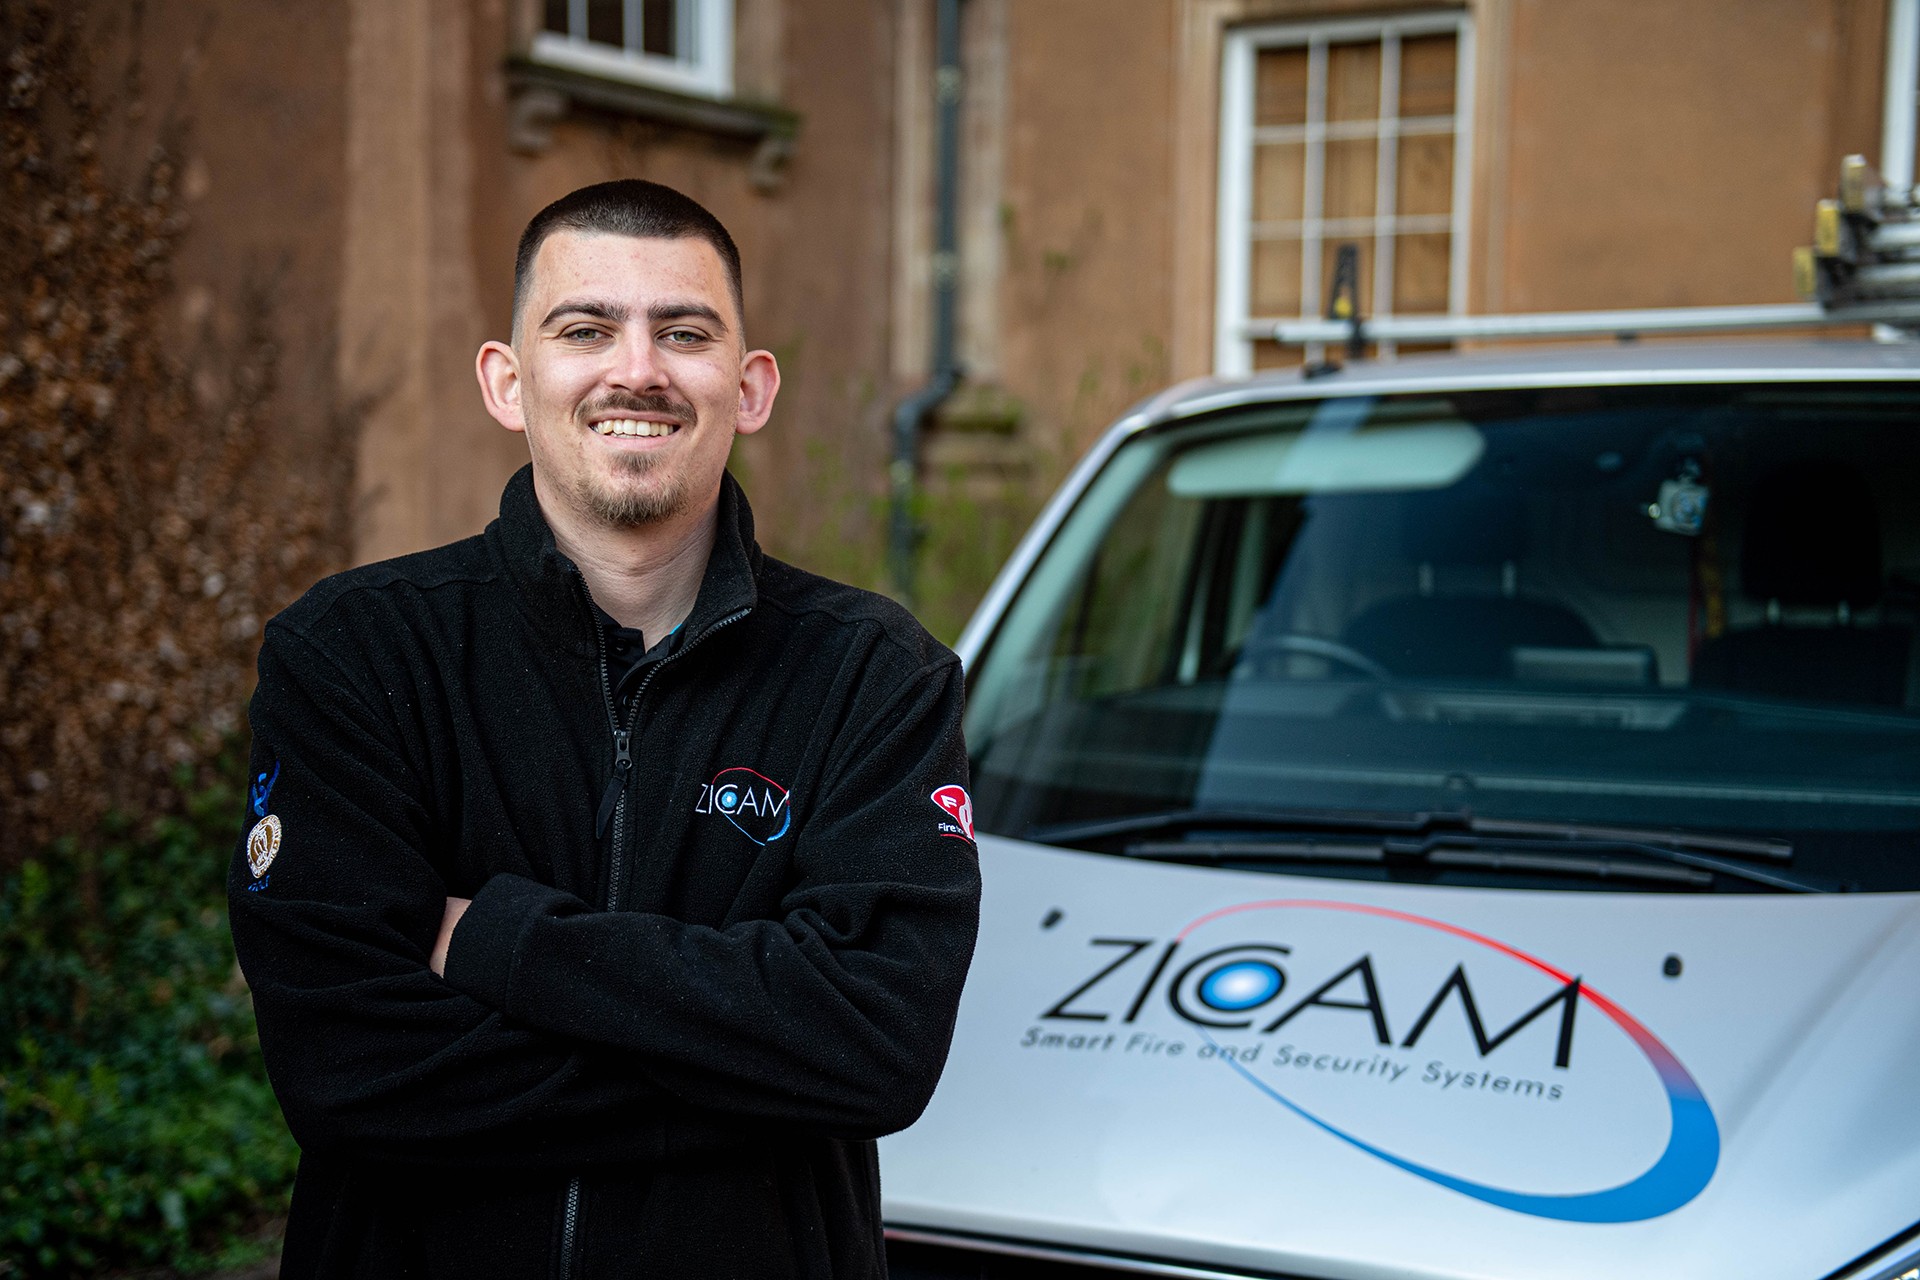 A Zicam team member who specialises in business access control systems